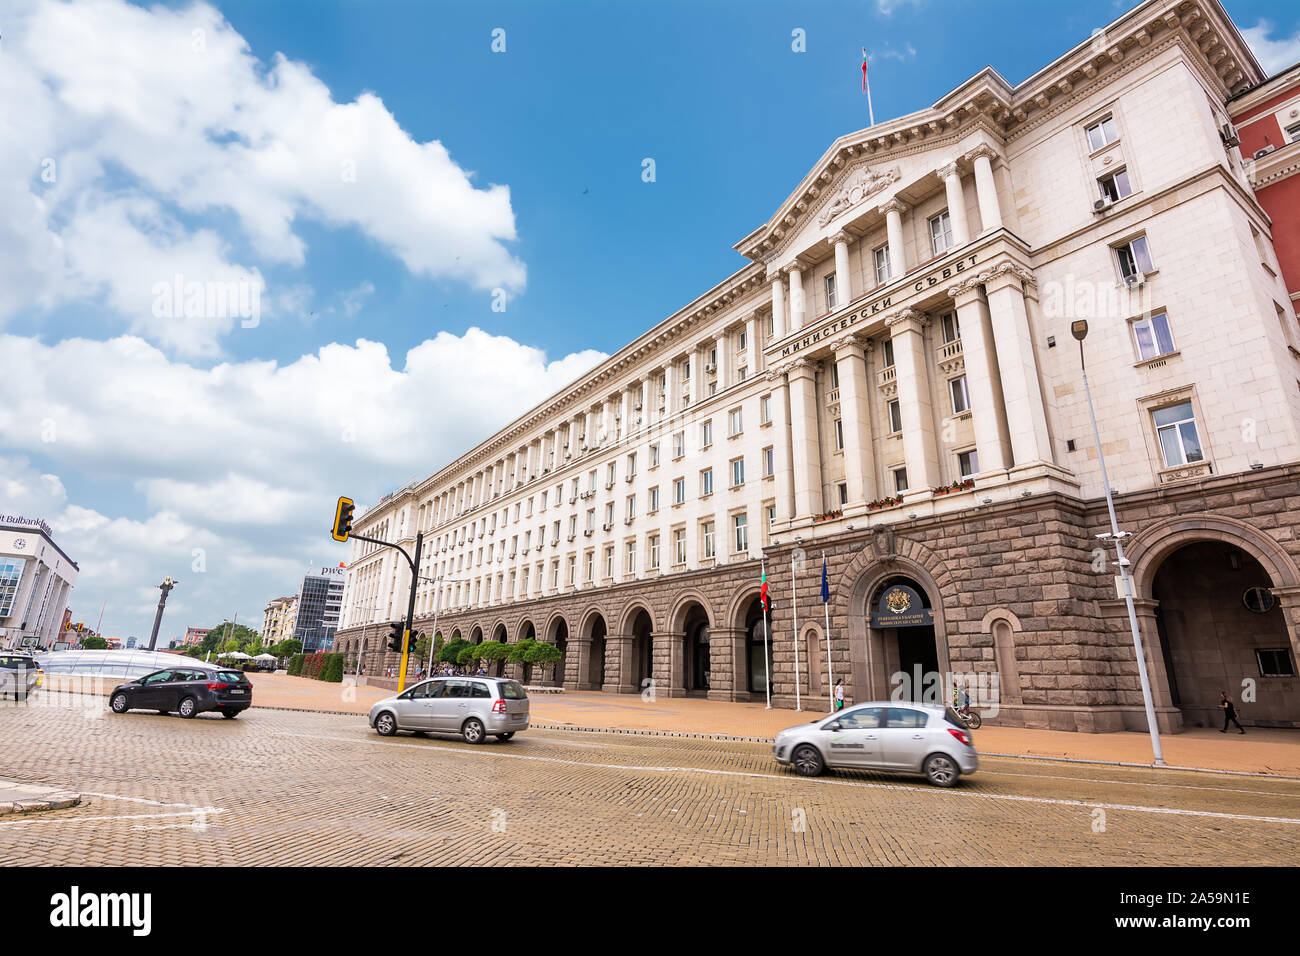 Sofia, Bulgaria - June 25, 2019: Palace of the Council of Ministers in Sofia on a normal day Stock Photo